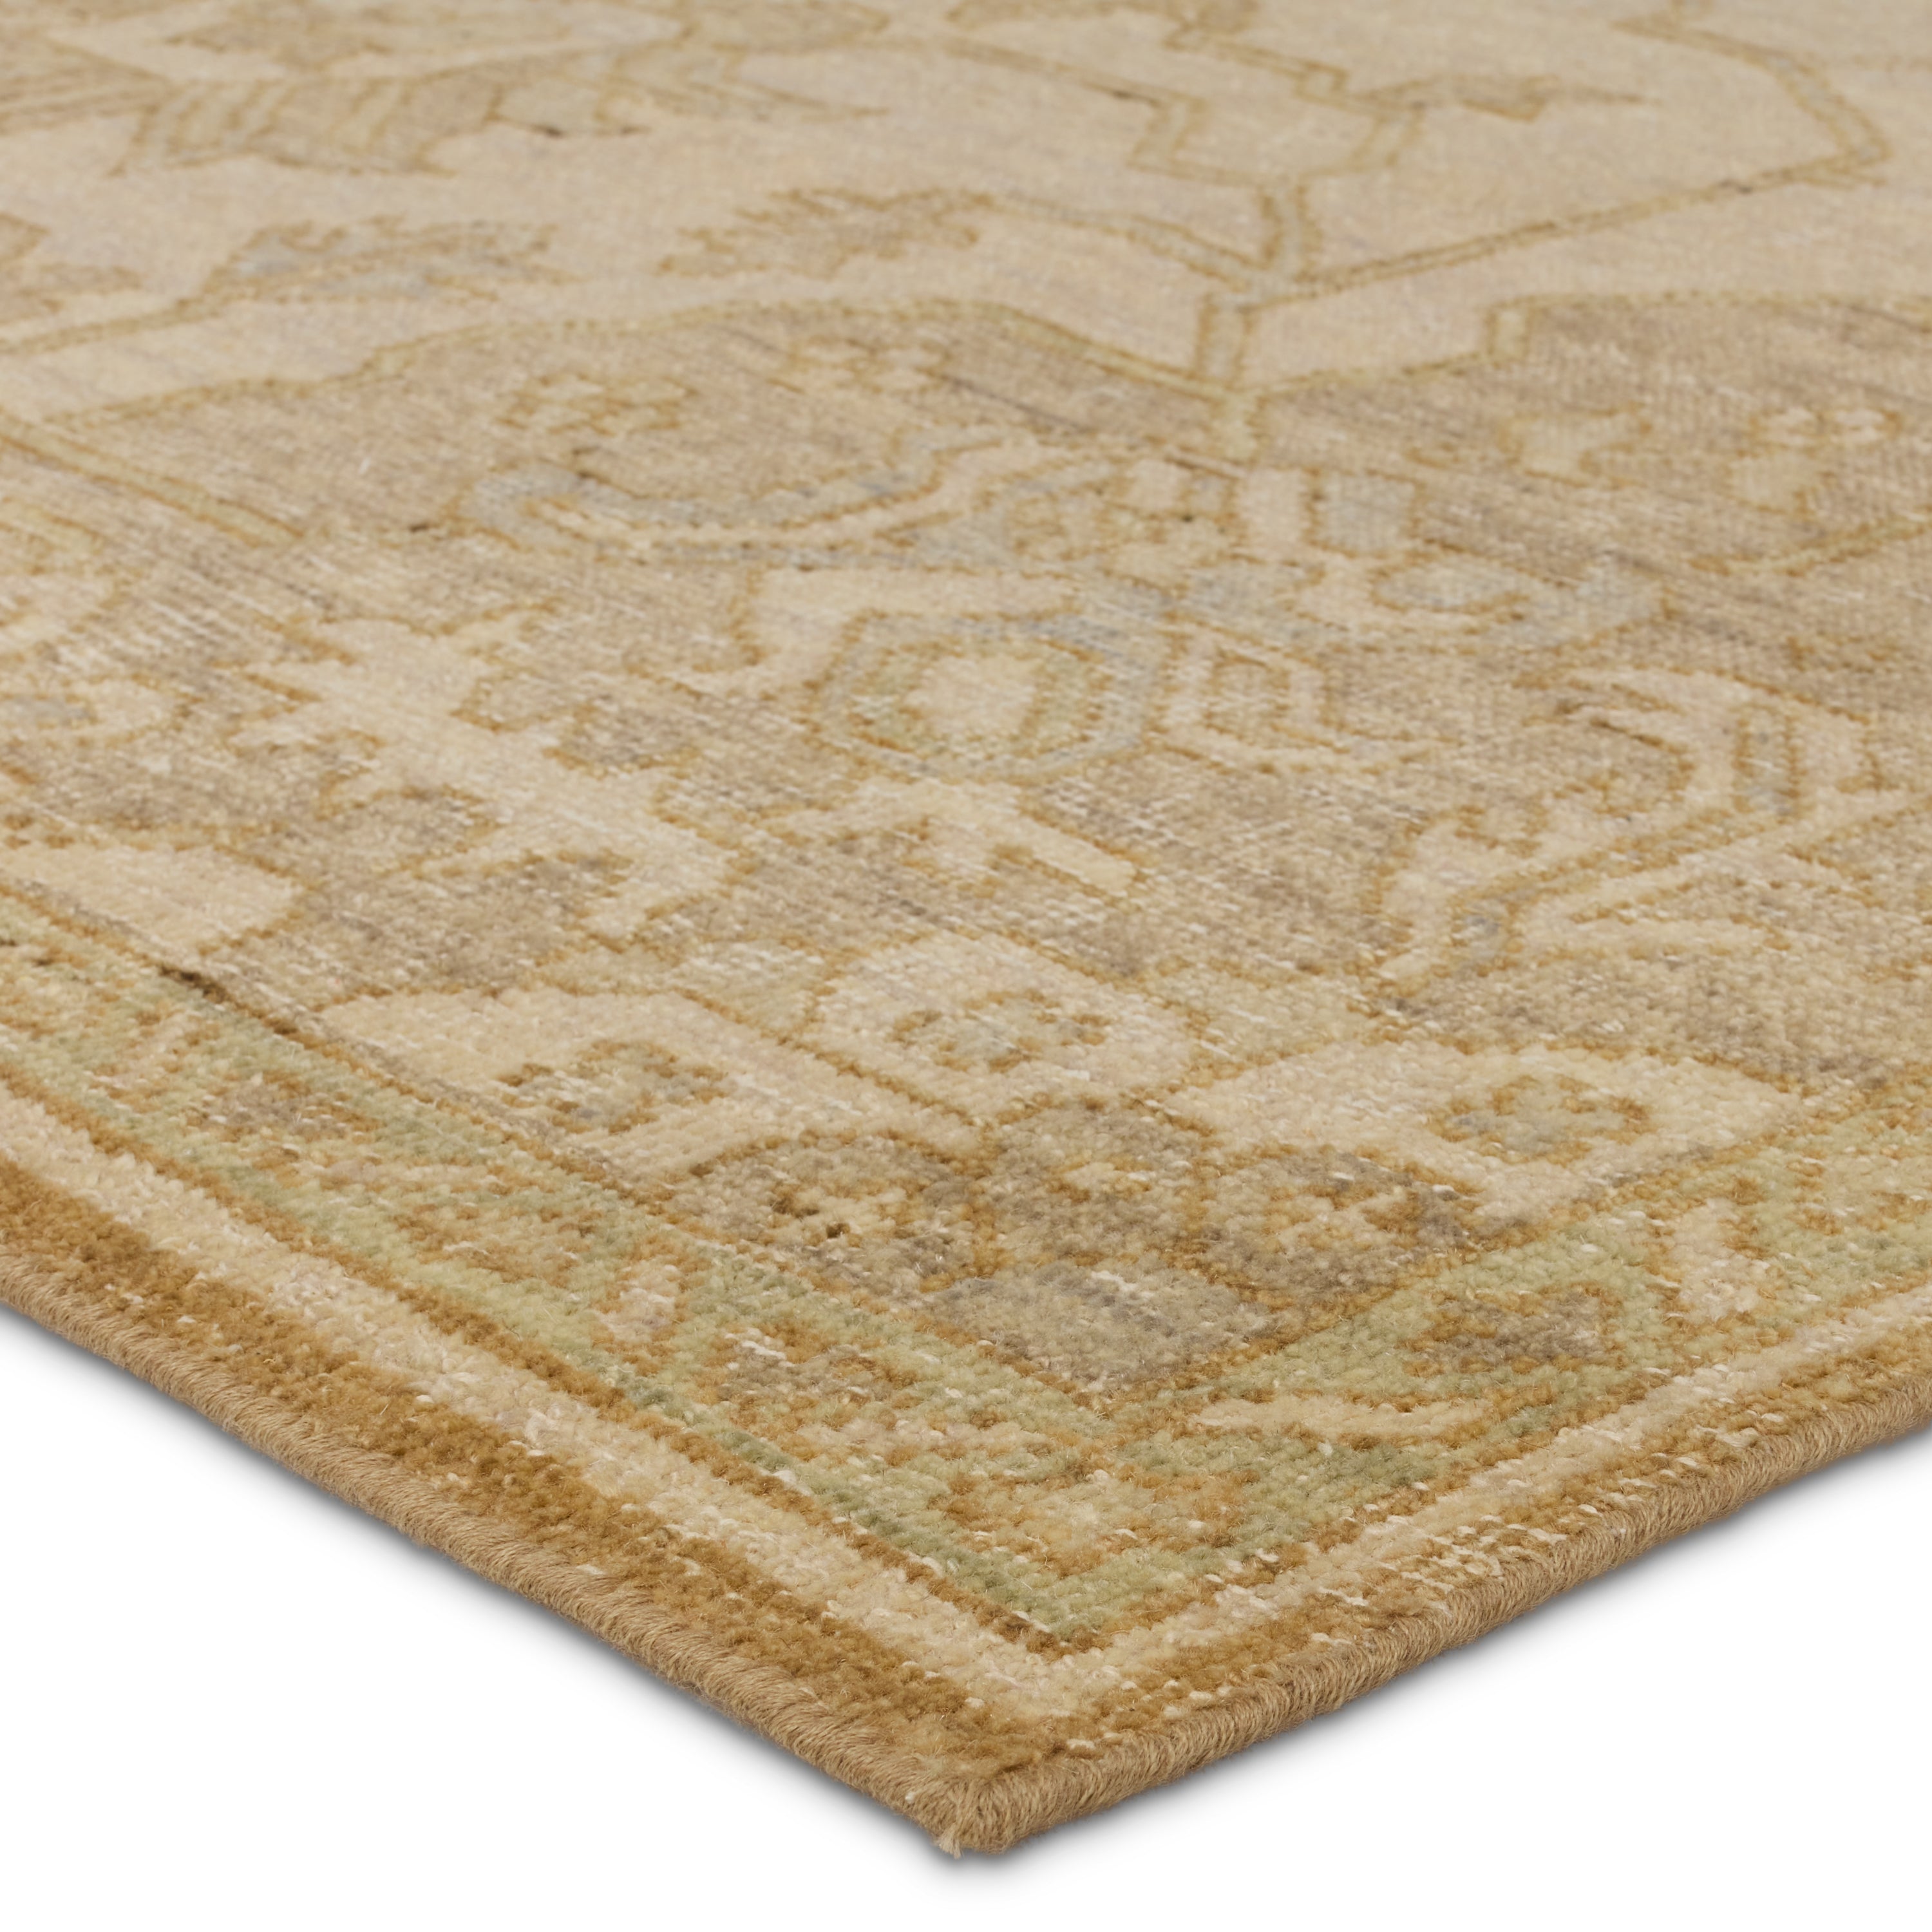 The Onessa collection marries traditional motifs with soft, subdued colorways for the perfect blend of fresh and time-honored style. These hand-knotted wool rugs feature a hand-sheared quality that lends the design a coveted vintage impression. The Danet rug features a distressed, floral pattern in hues of tan, gold, taupe, cream, and hints of green. Amethyst Home provides interior design, new construction, custom furniture, and area rugs in the San Diego metro area.